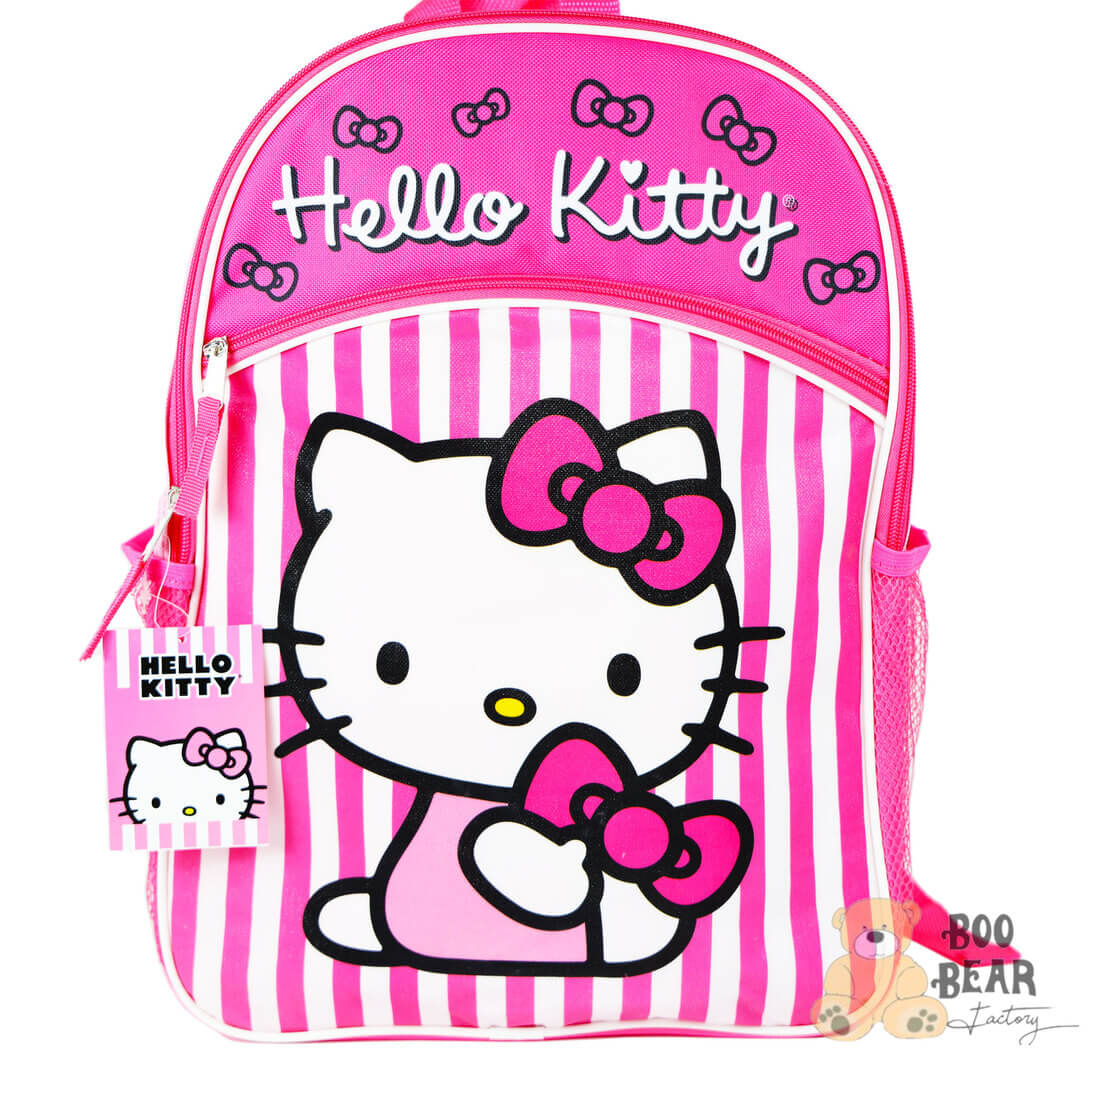 Hello Kitty Bows and Stripes Backpack with One Front Pocket Pink